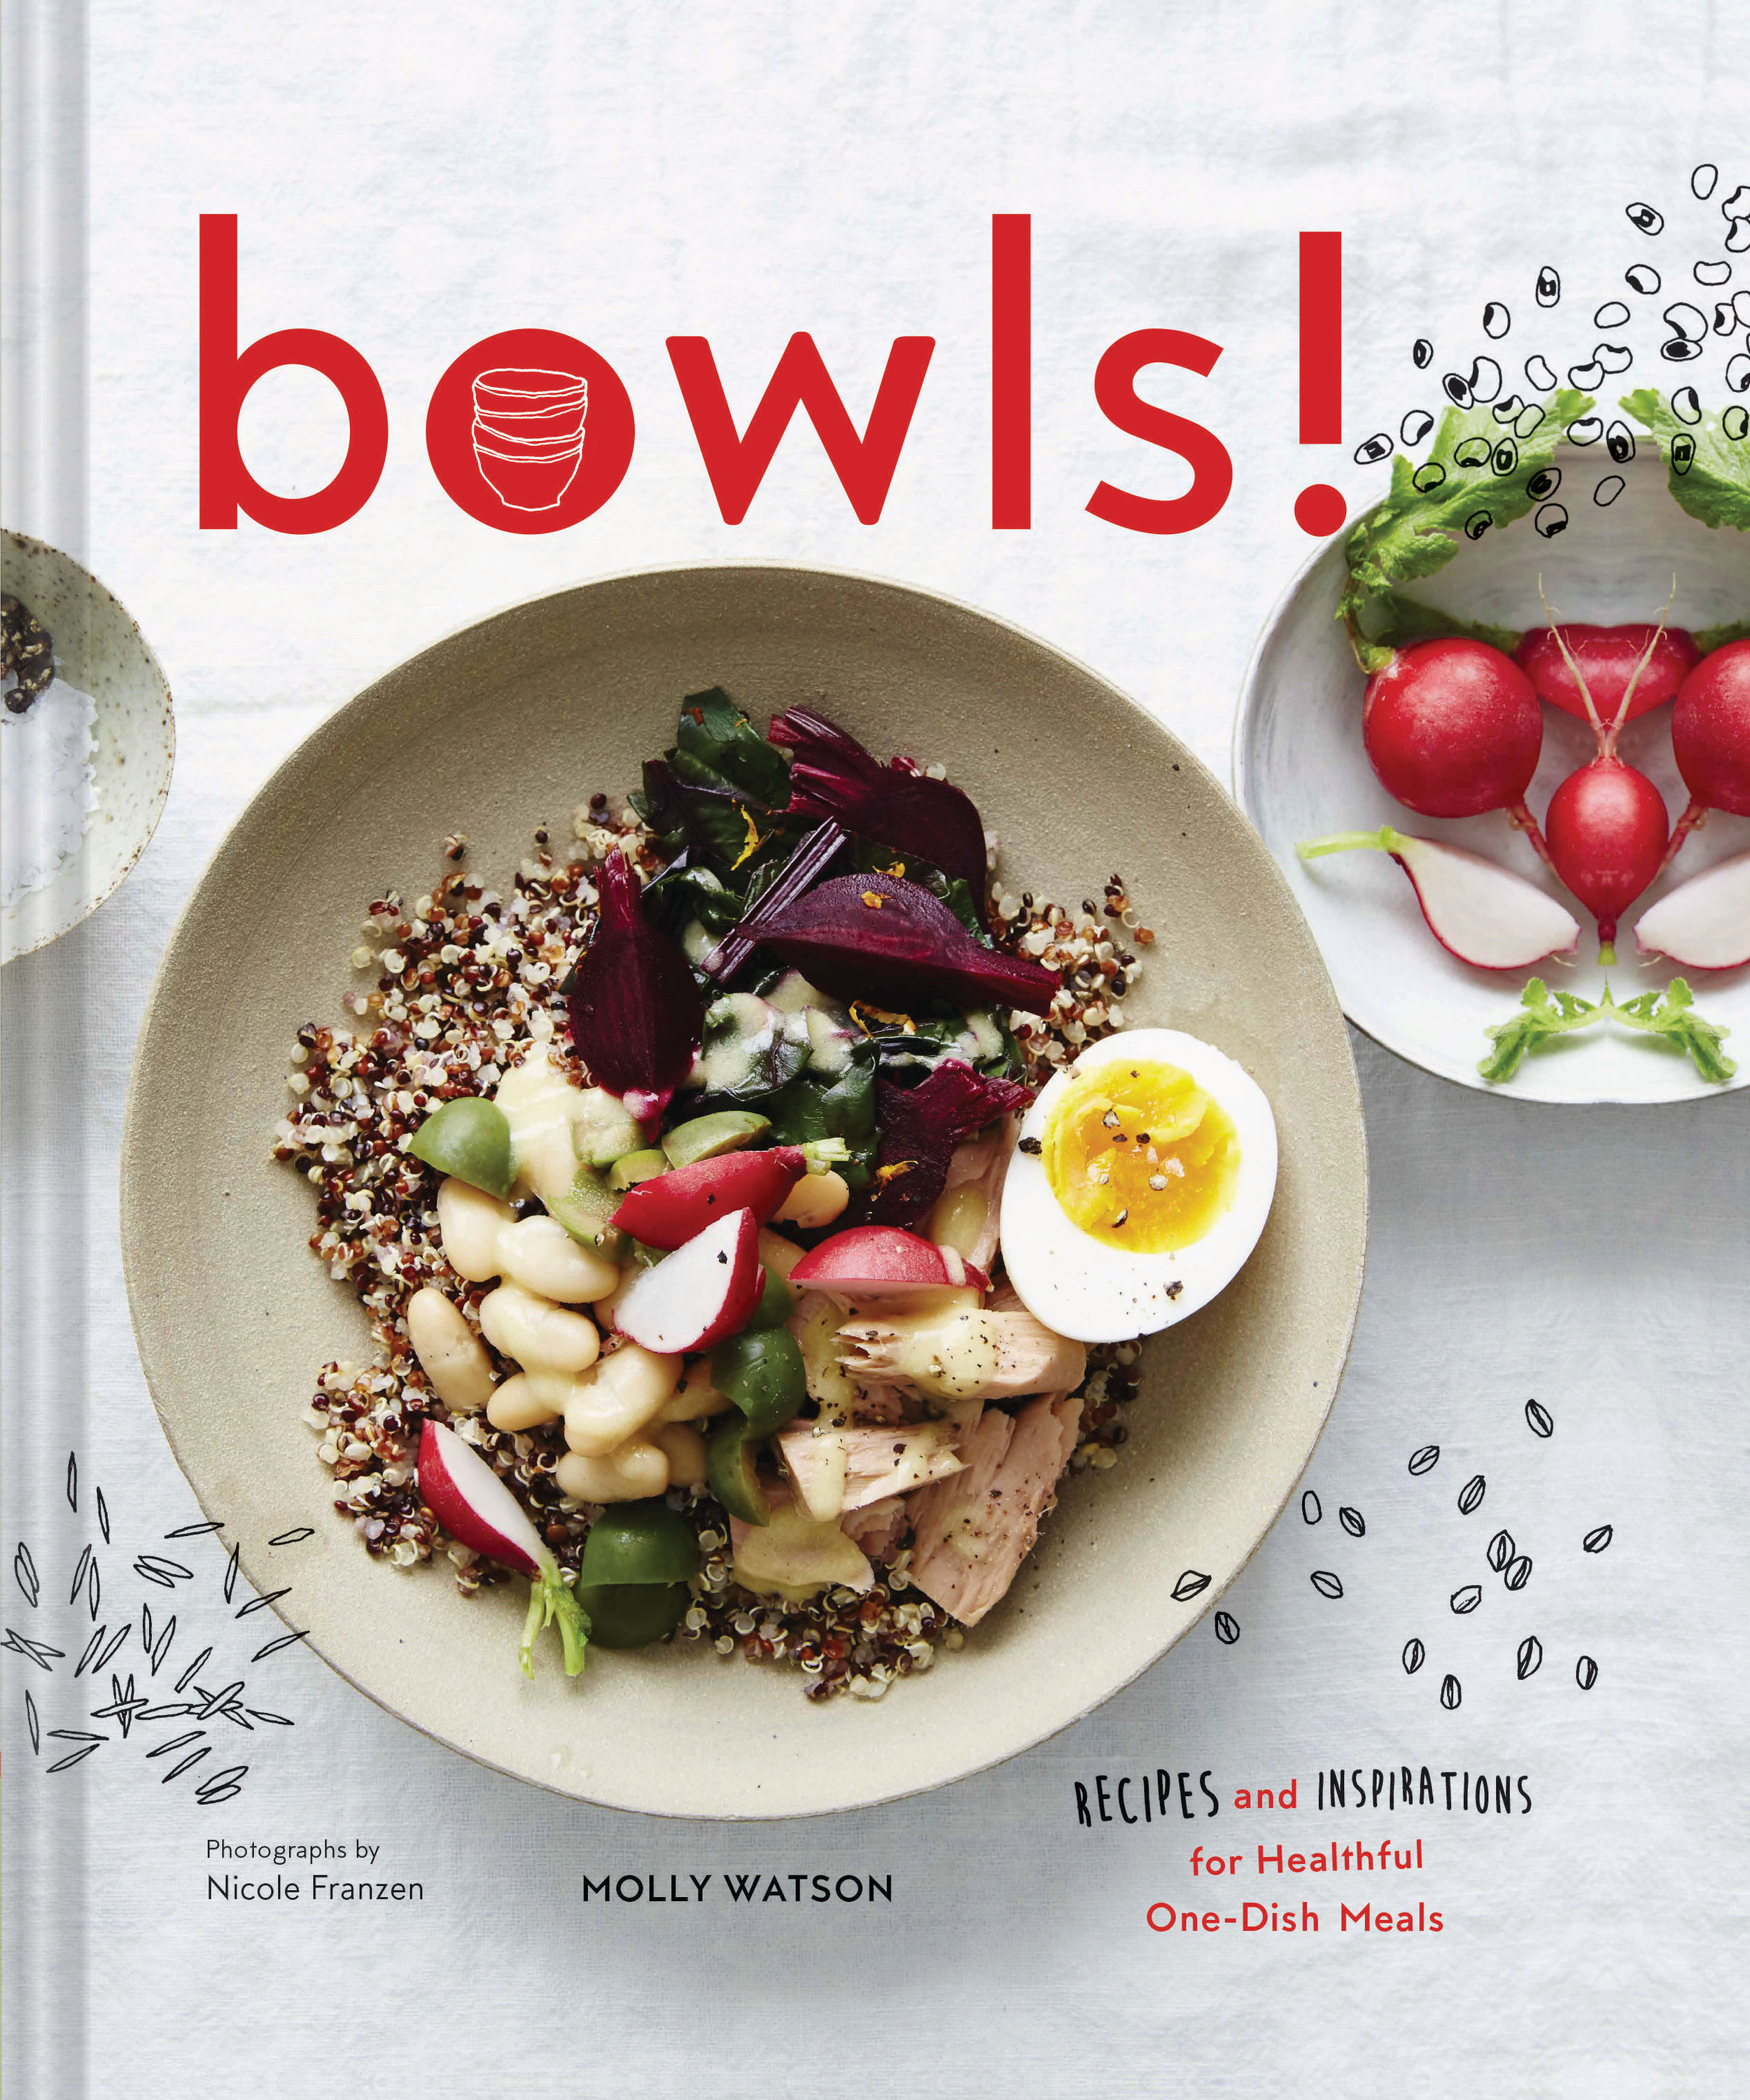 Bowls! Recipes and Inspiration for Healthful One-Dish Meals